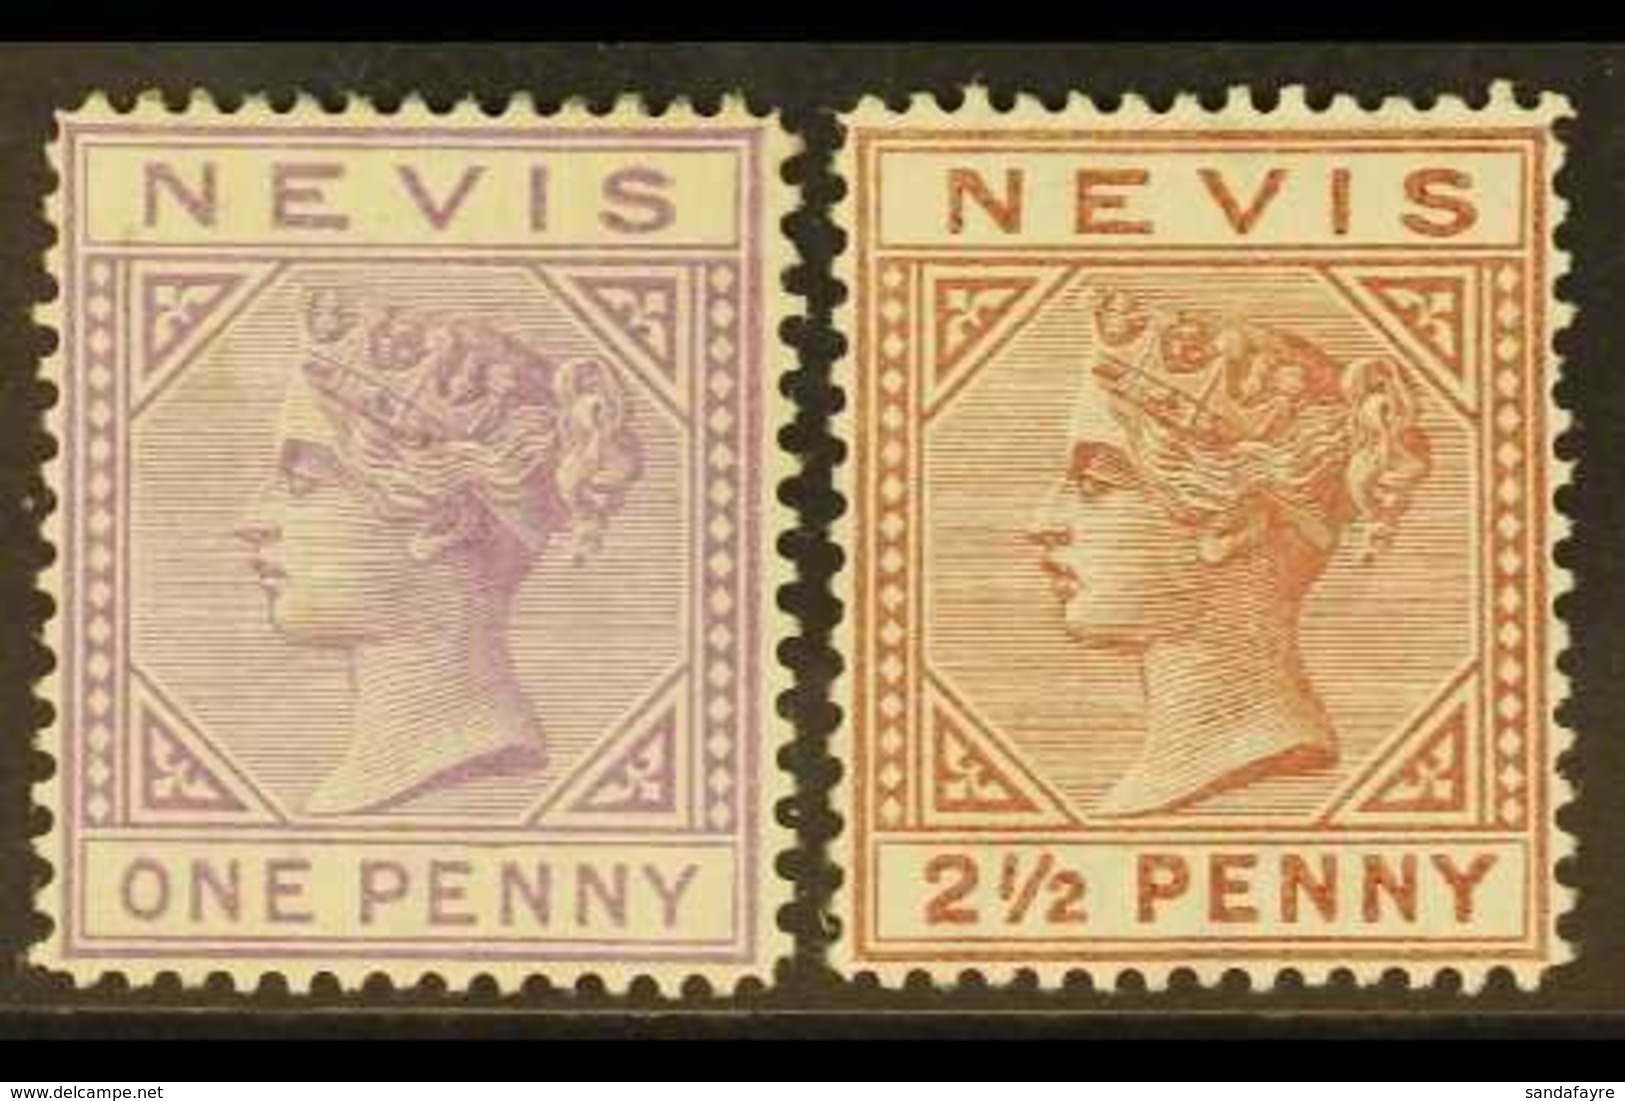 1879-80 1d Lilac-mauve And 2½d Red Brown, Watermark "CC", SG 23/24, Fine Mint. (2) For More Images, Please Visit Http:// - St.Cristopher-Nevis & Anguilla (...-1980)